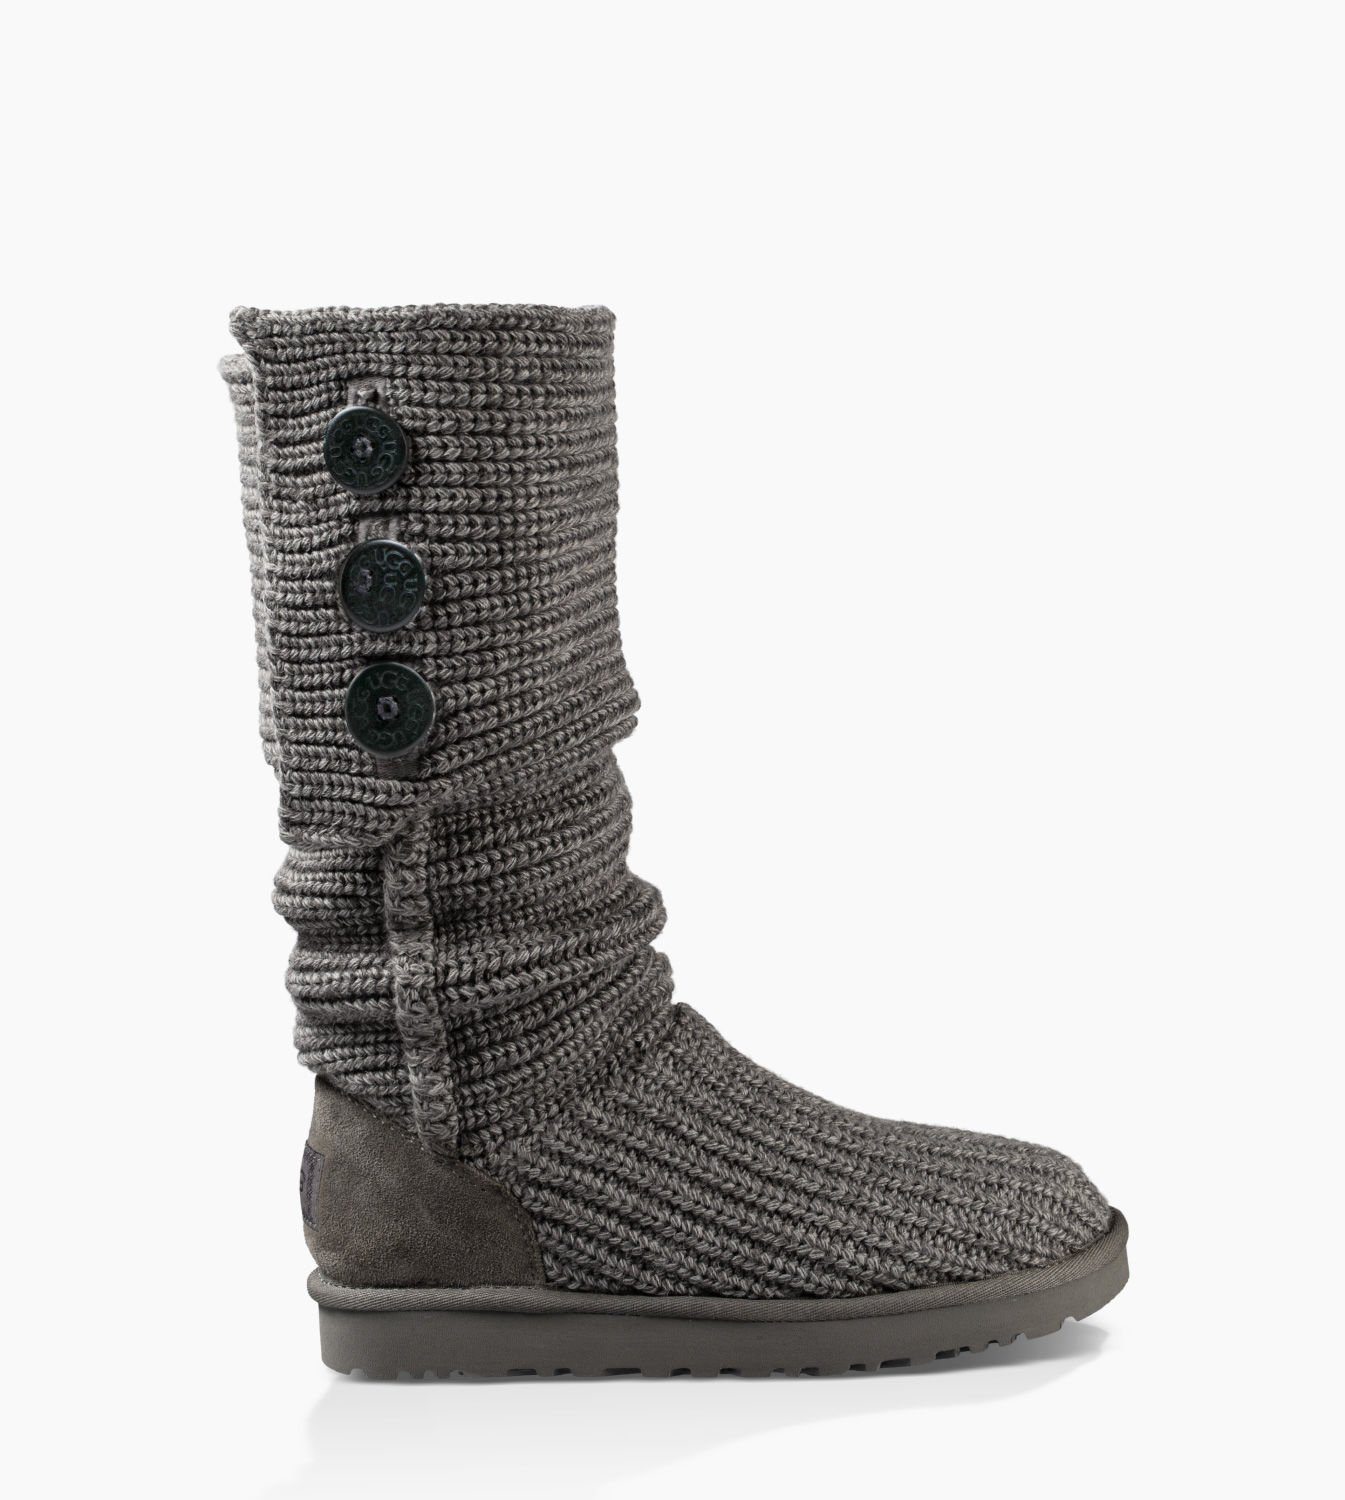 CLASSIC CARDY BOOT